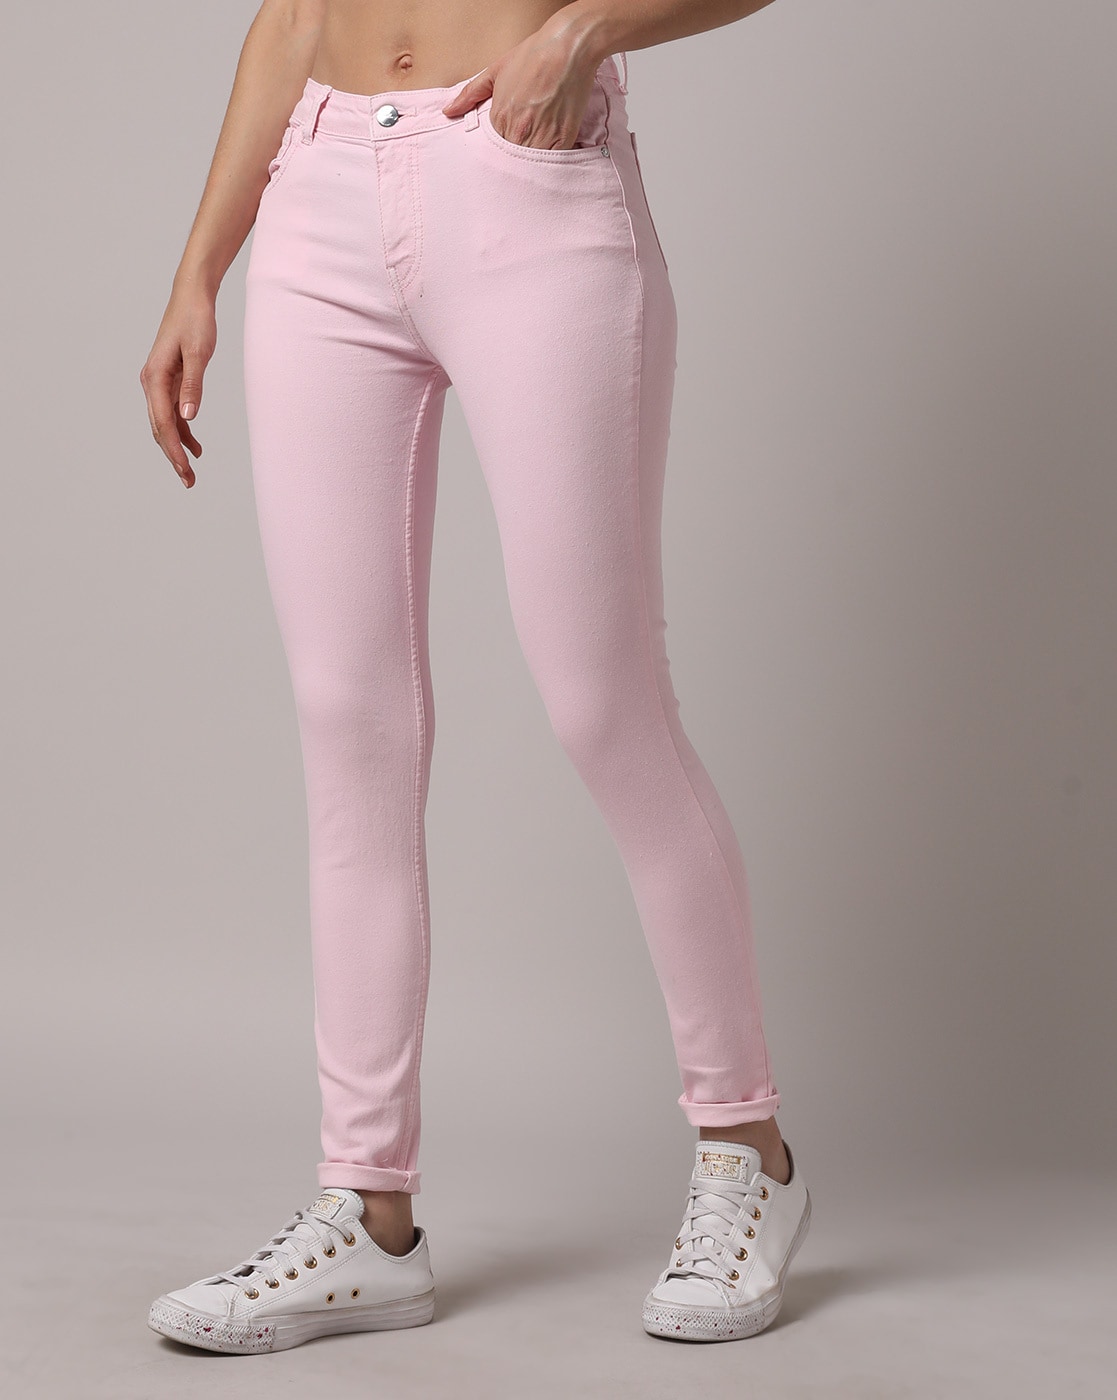 Nifty Slim Women Pink Jeans - Buy Nifty Slim Women Pink Jeans Online at  Best Prices in India | Flipkart.com